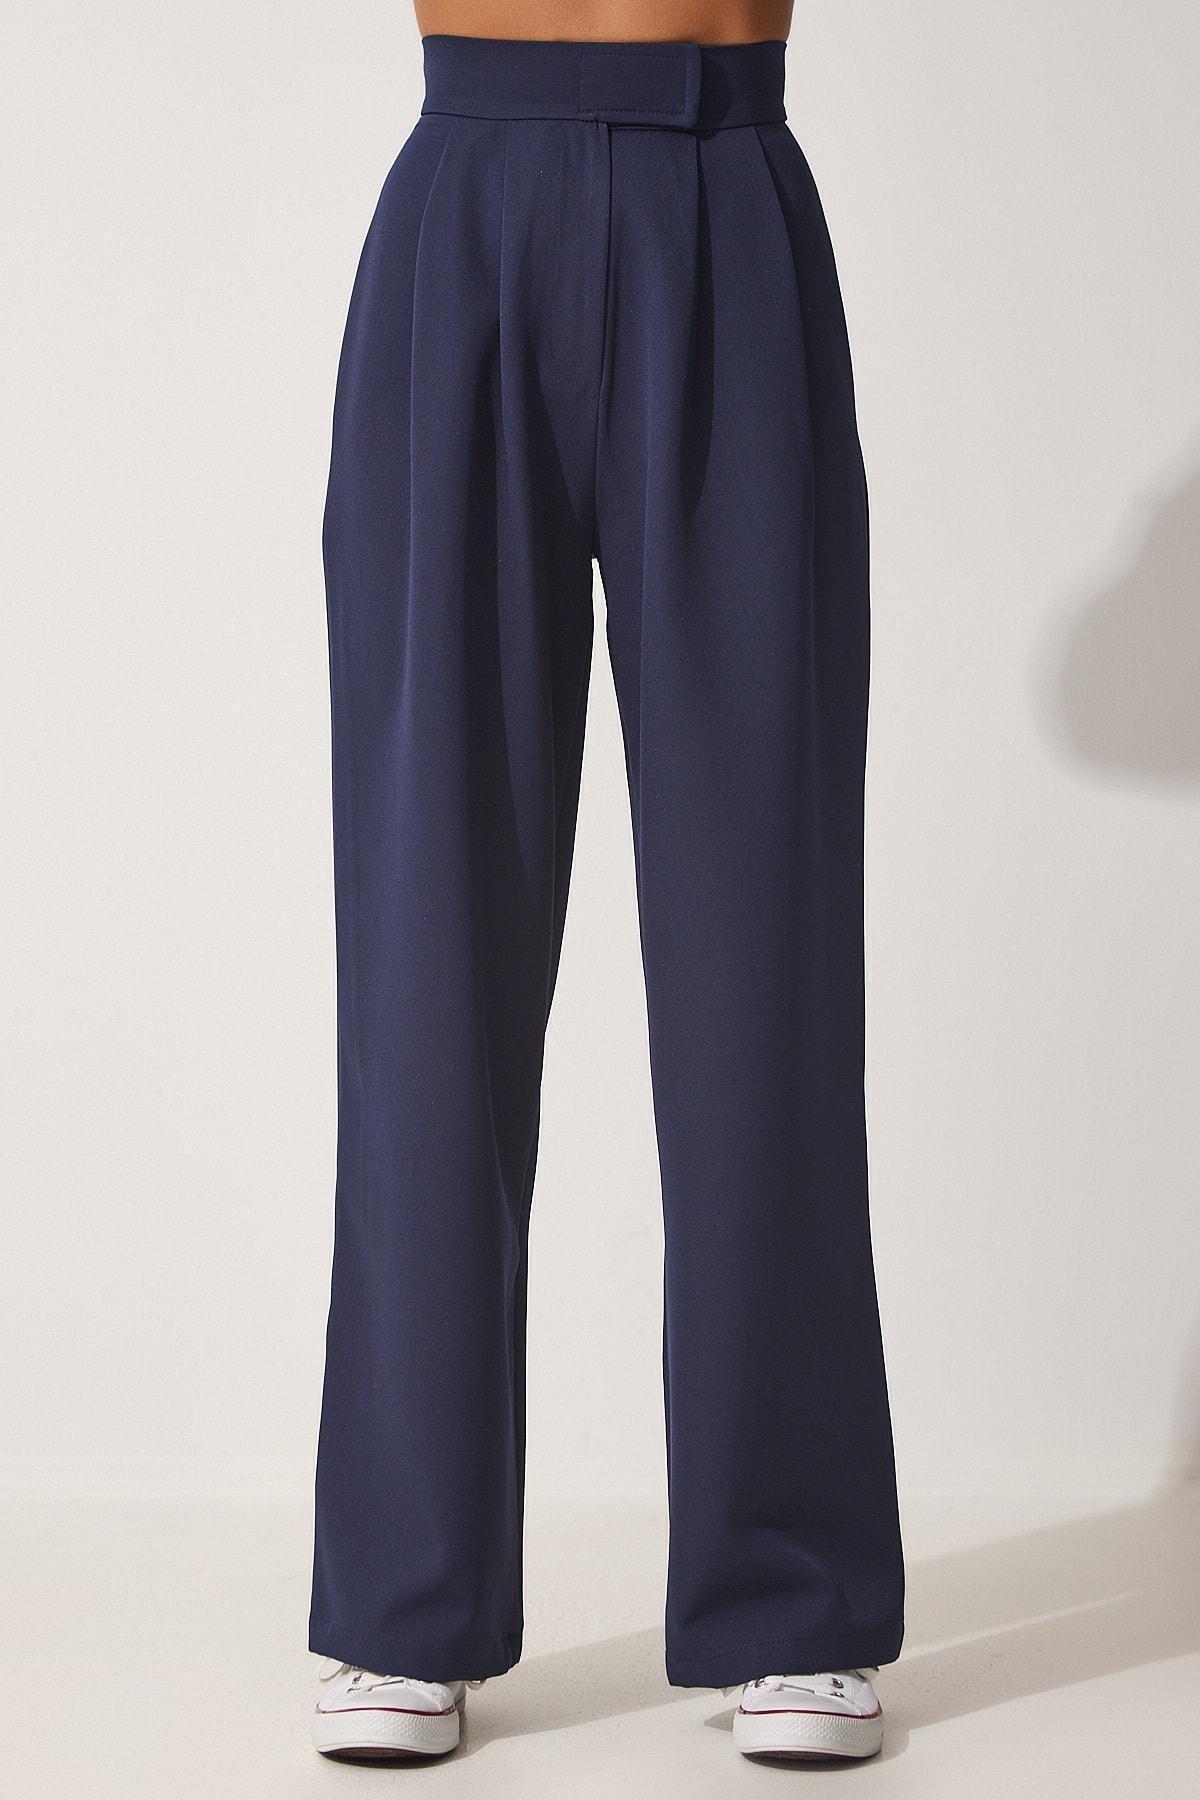 Happiness Istanbul - Blue Relaxed Pants